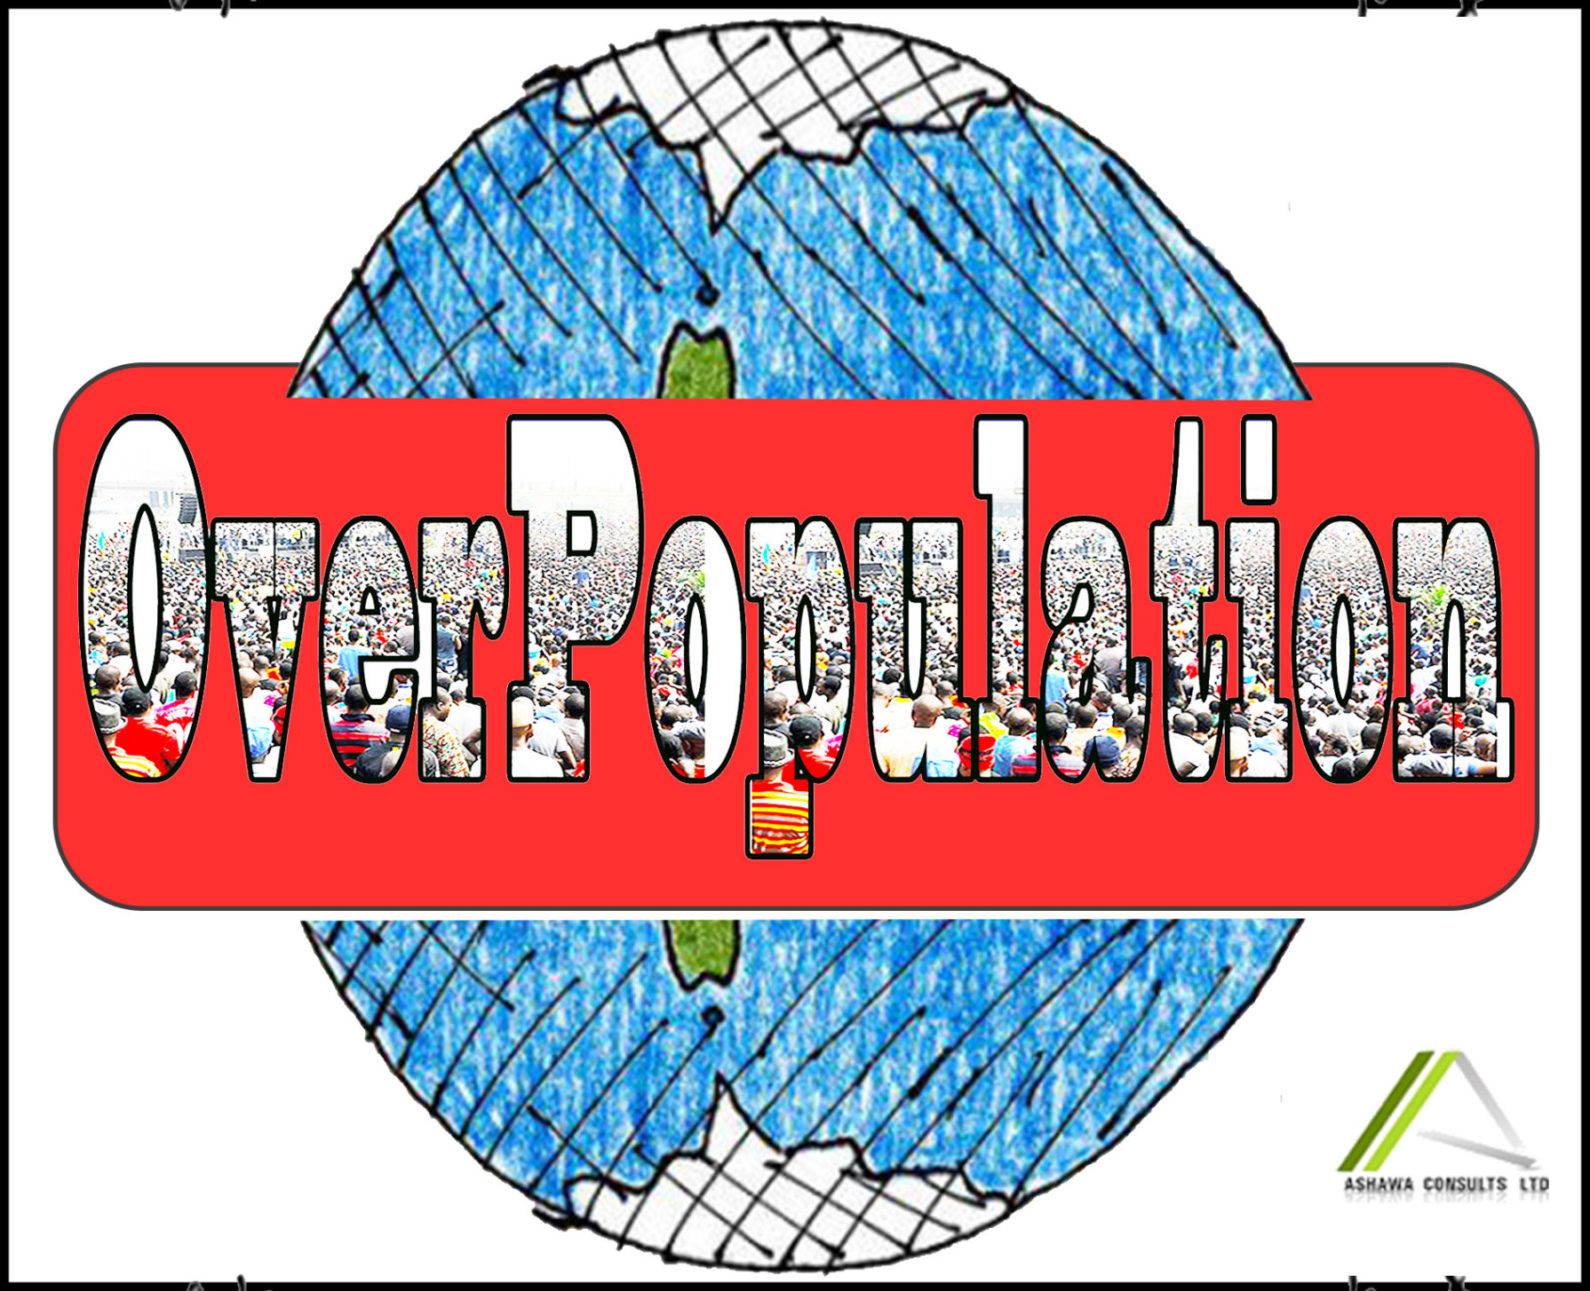 OVERPOPULATION: CAUSES, MITIGATION MEASURES AND IMPACT ON THE ENVIRONMENT